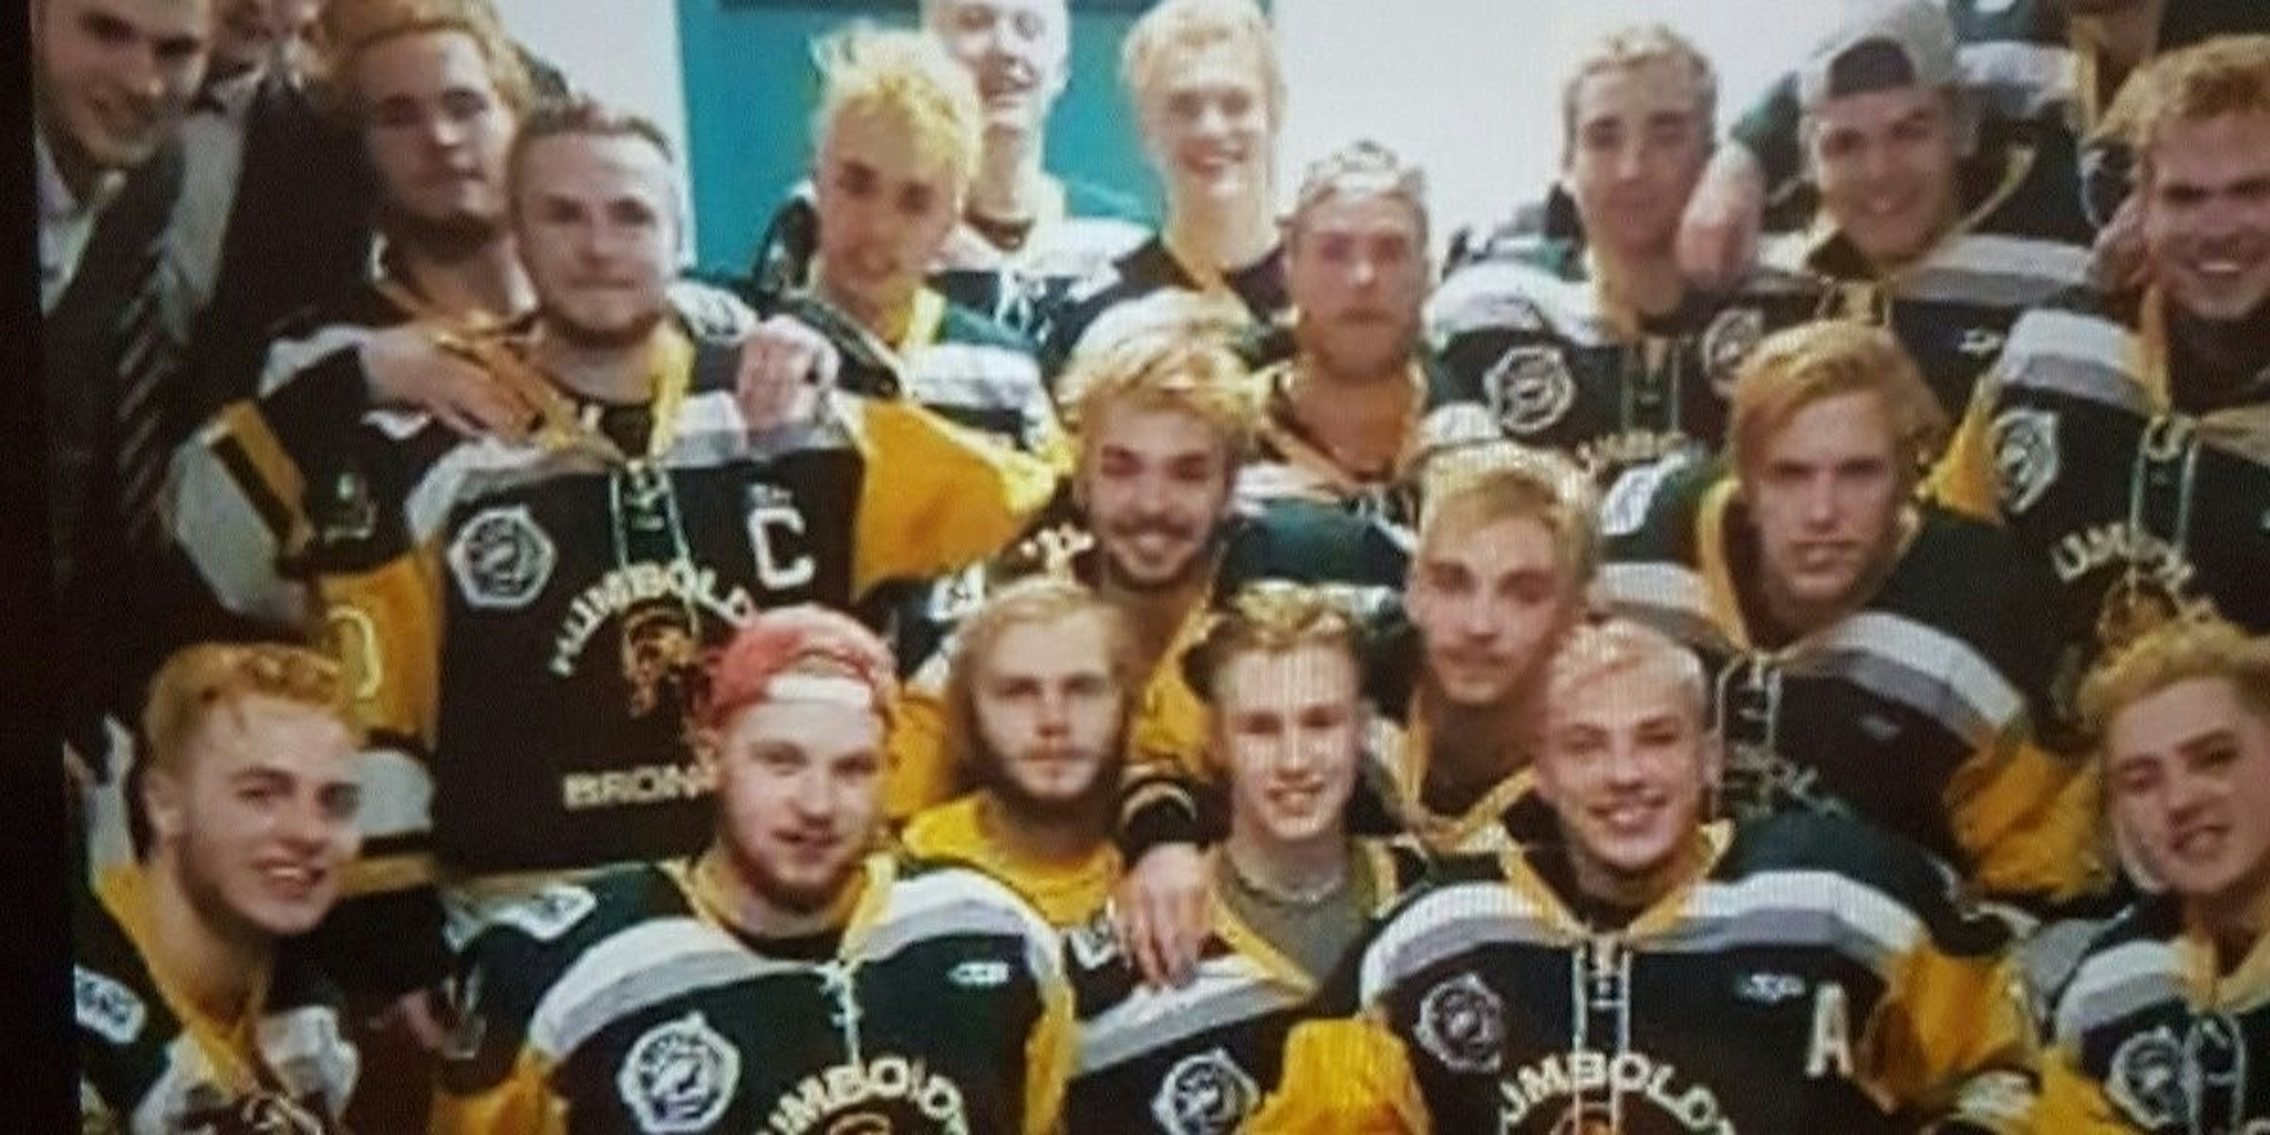 Daily Roundup: Former Humboldt Broncos player hits the ice, Adidas